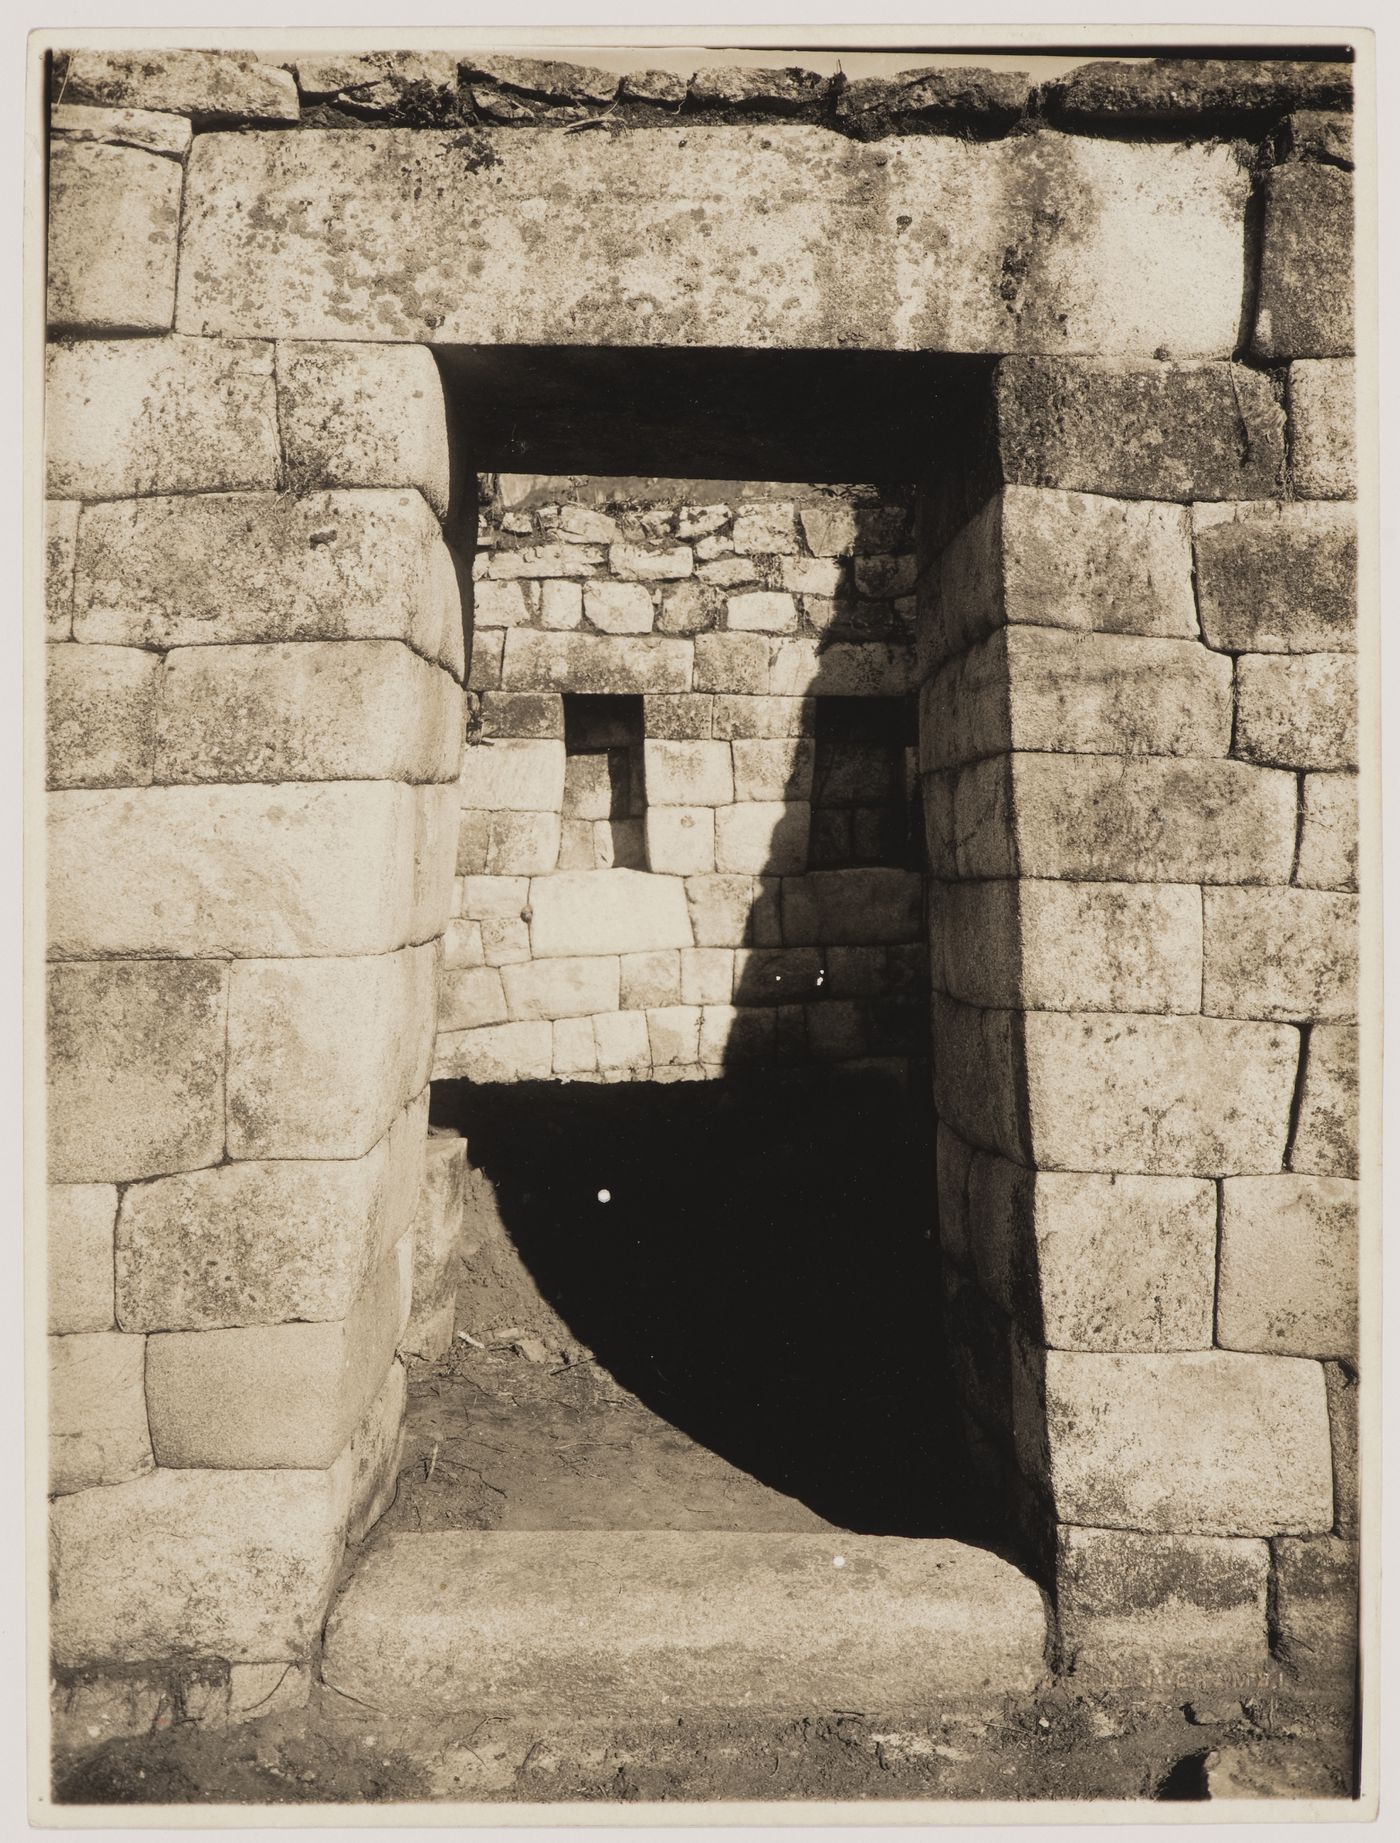 View of a courtyard, entrance and interior of an unidentified building, King's Group, Machu Picchu, Peru